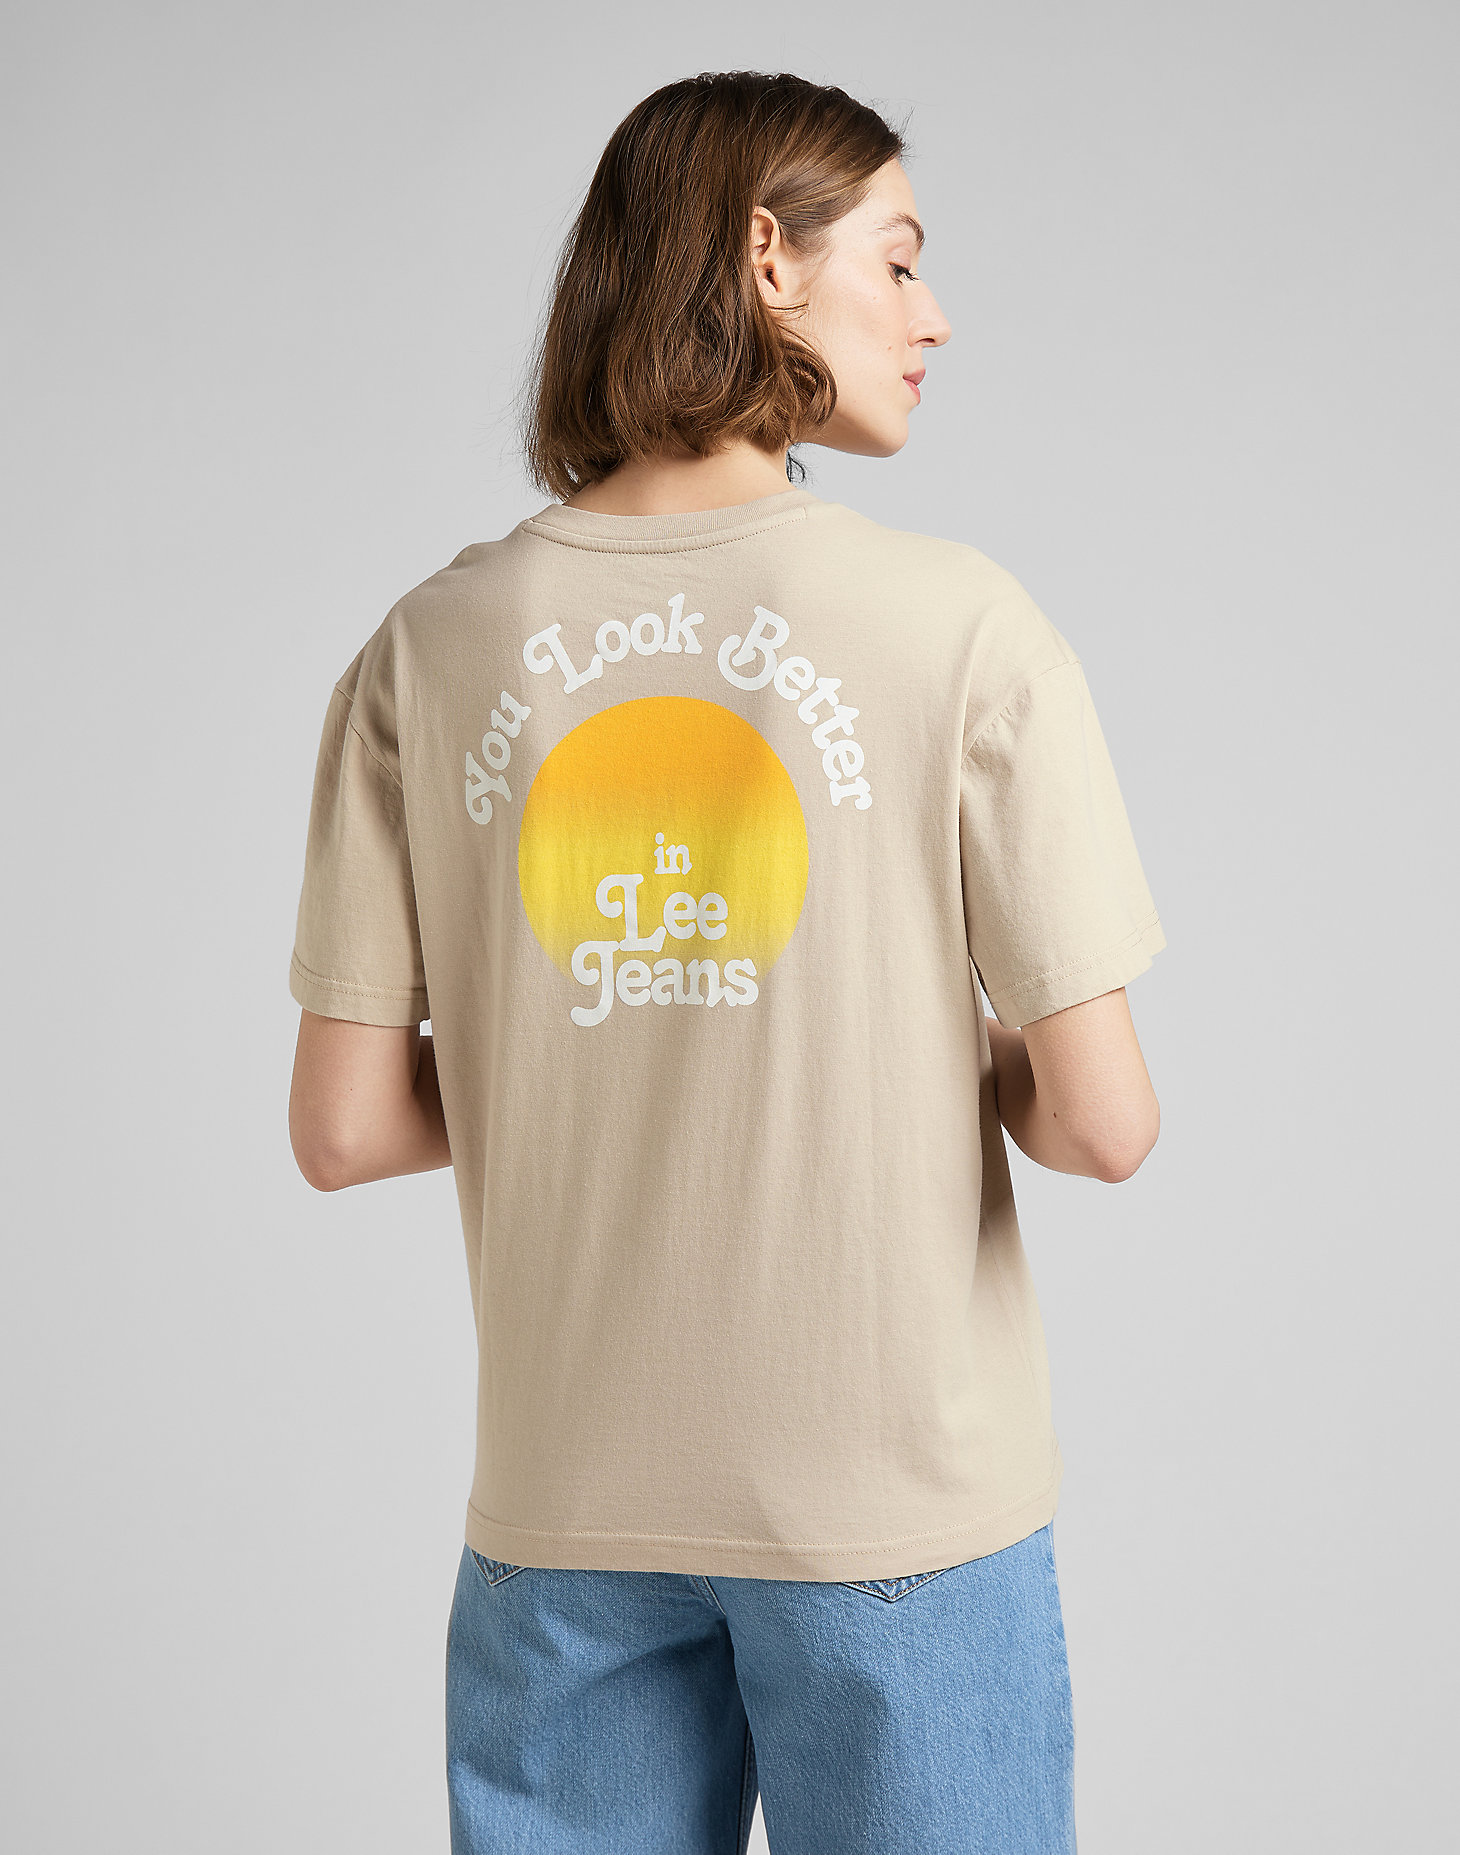 Relaxed Crew Tee in Oxford Tan alternative view 4